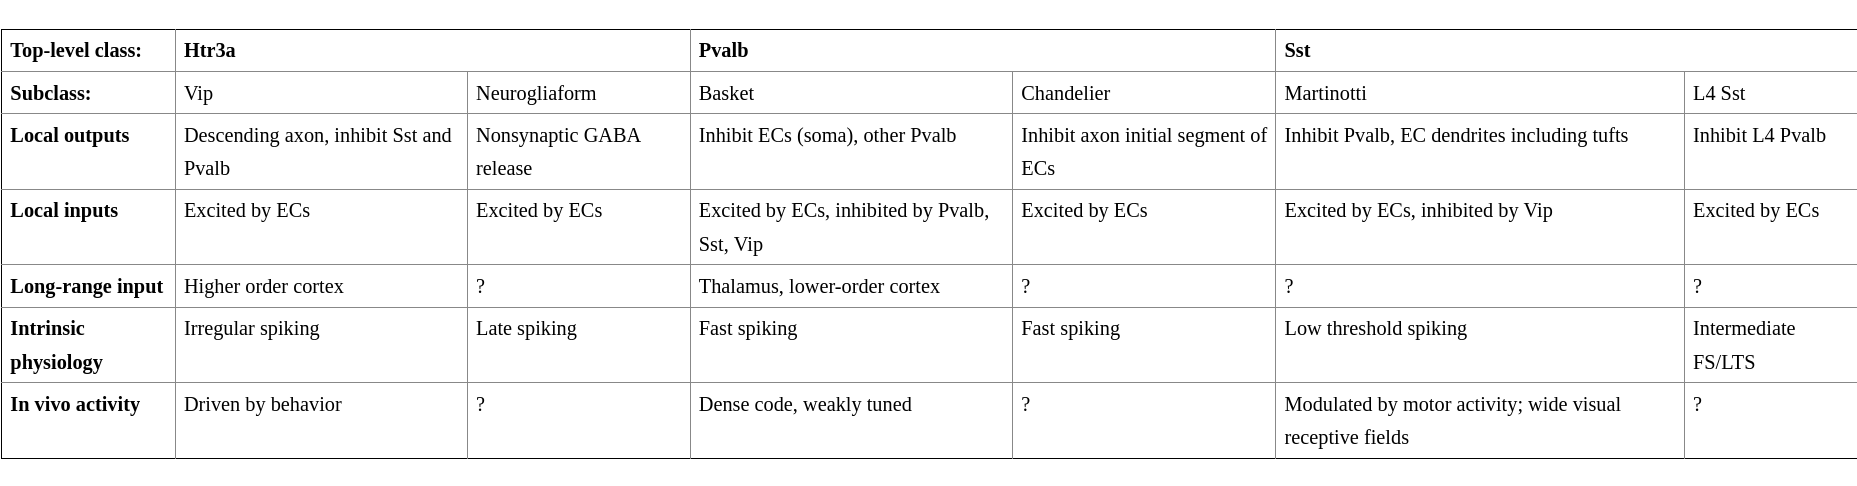 Table with overview of inhibitoryclasses